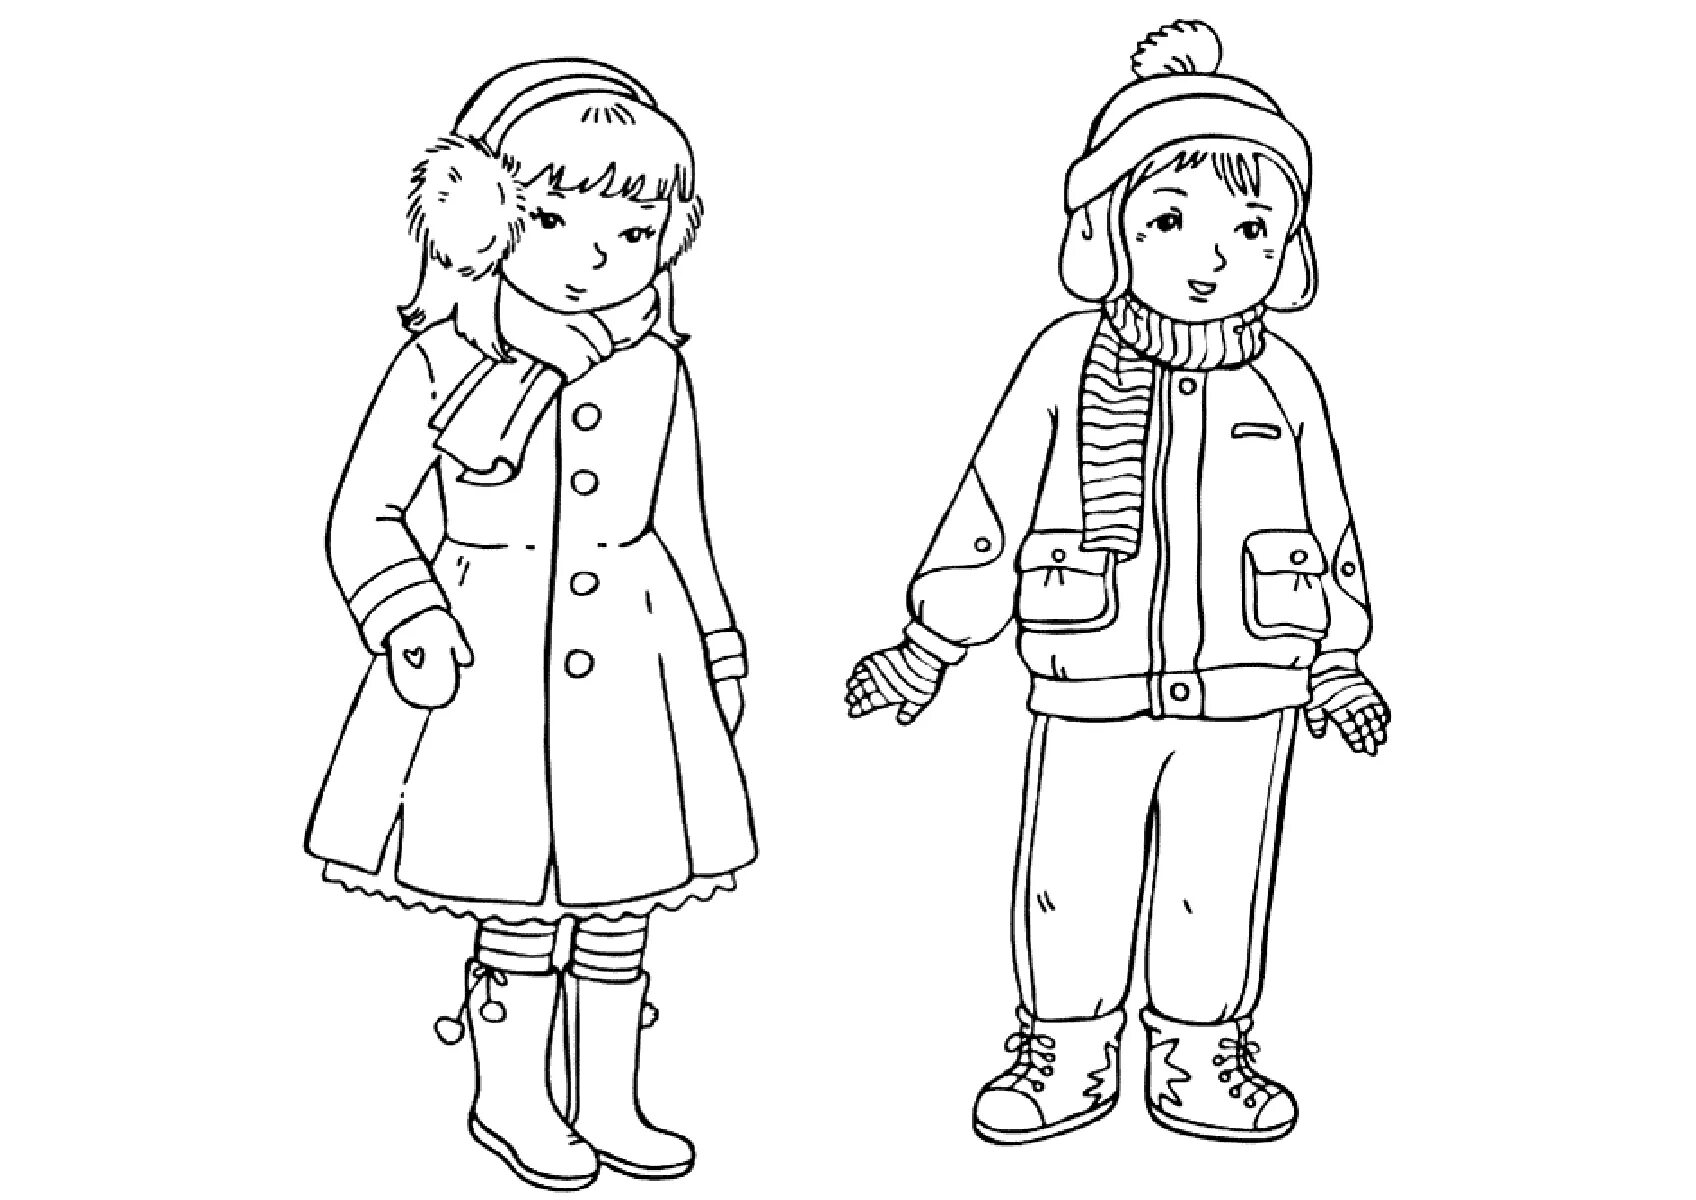 Winter clothes for children 6 7 years old #2